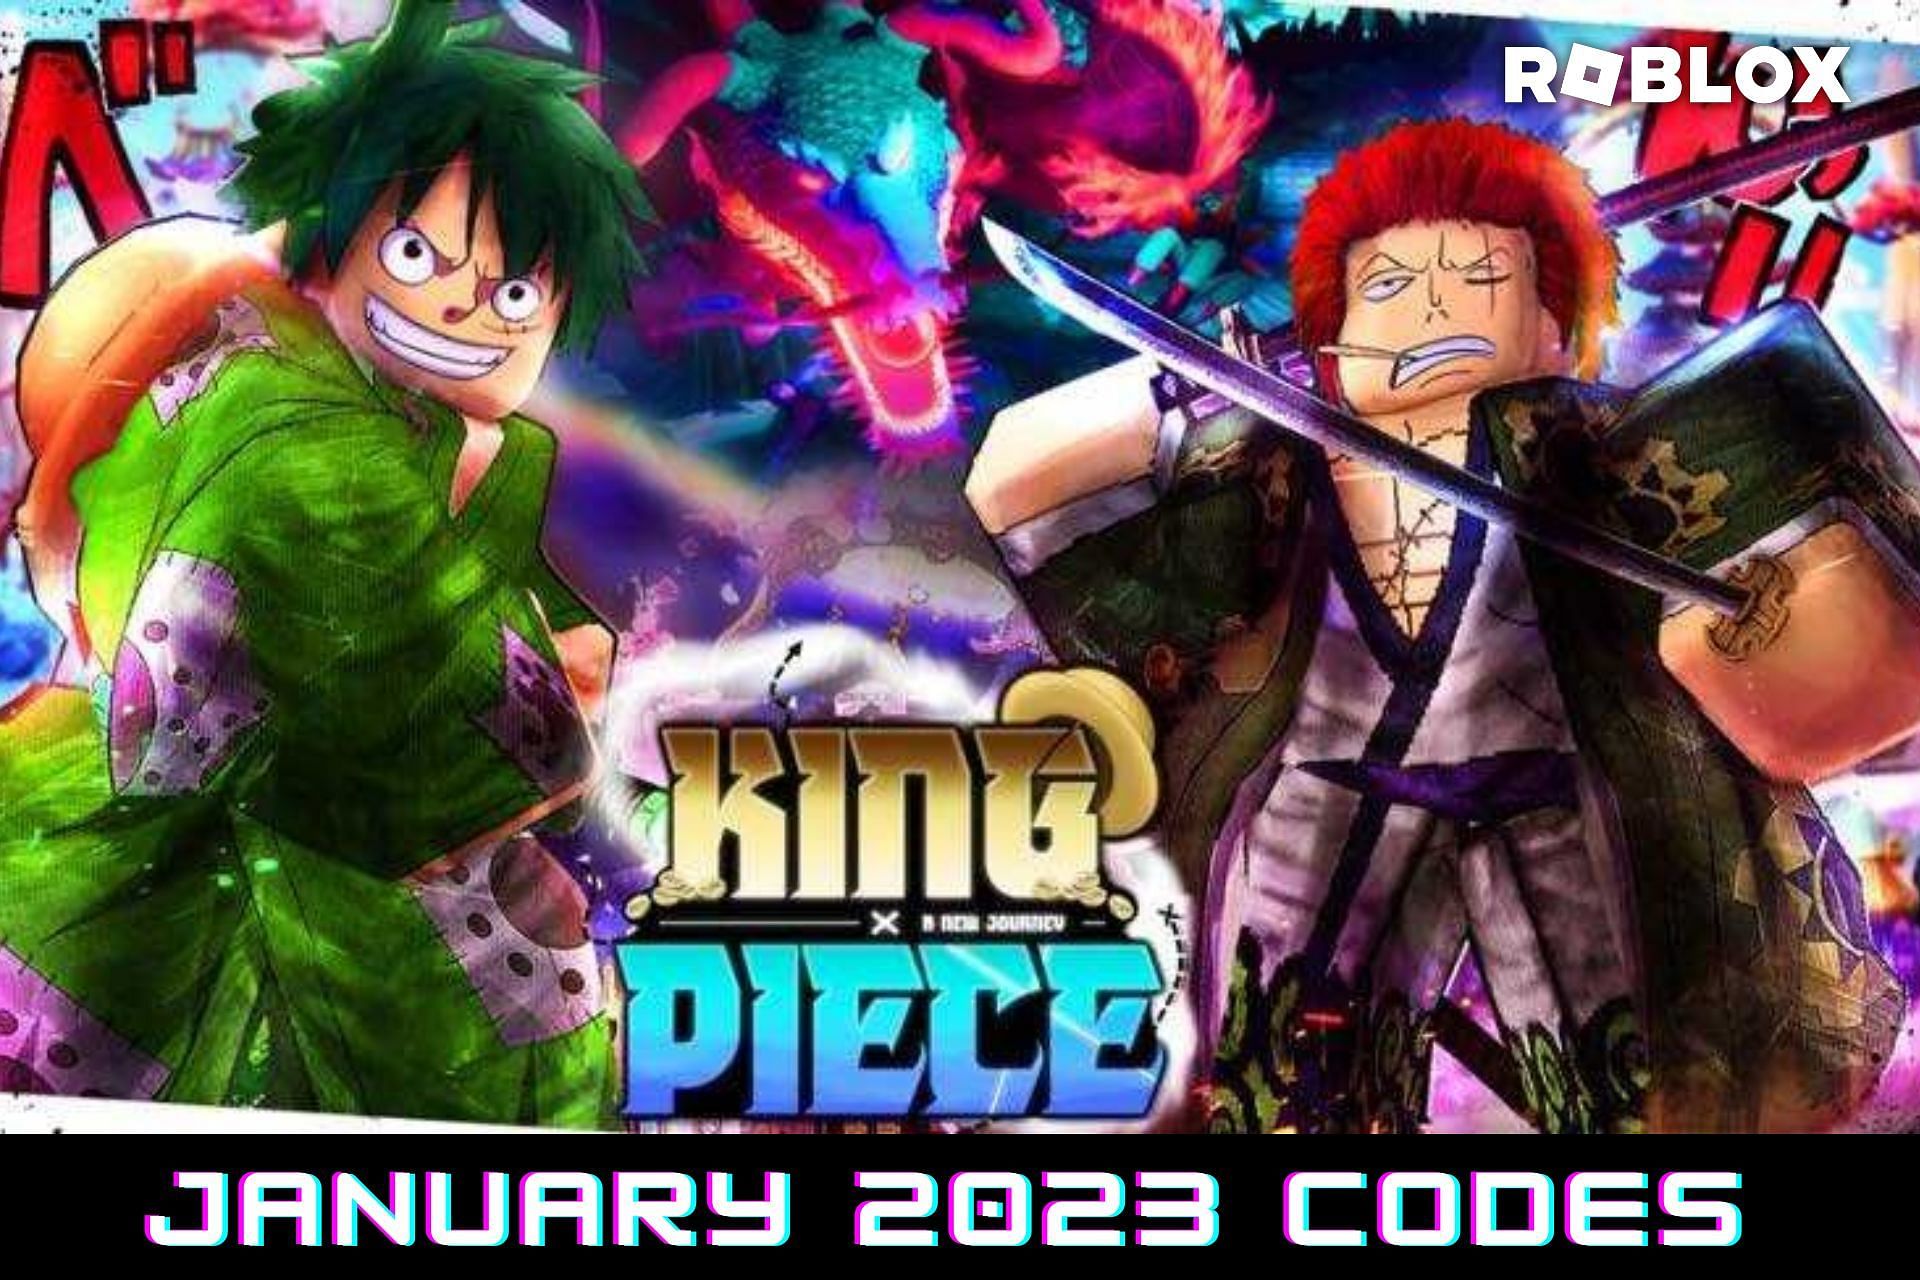 NEW* ALL WORKING FREE CODES KING LEGACY (King Piece) gives FREE Beli + FREE  Gems + FREE Stat Reset 